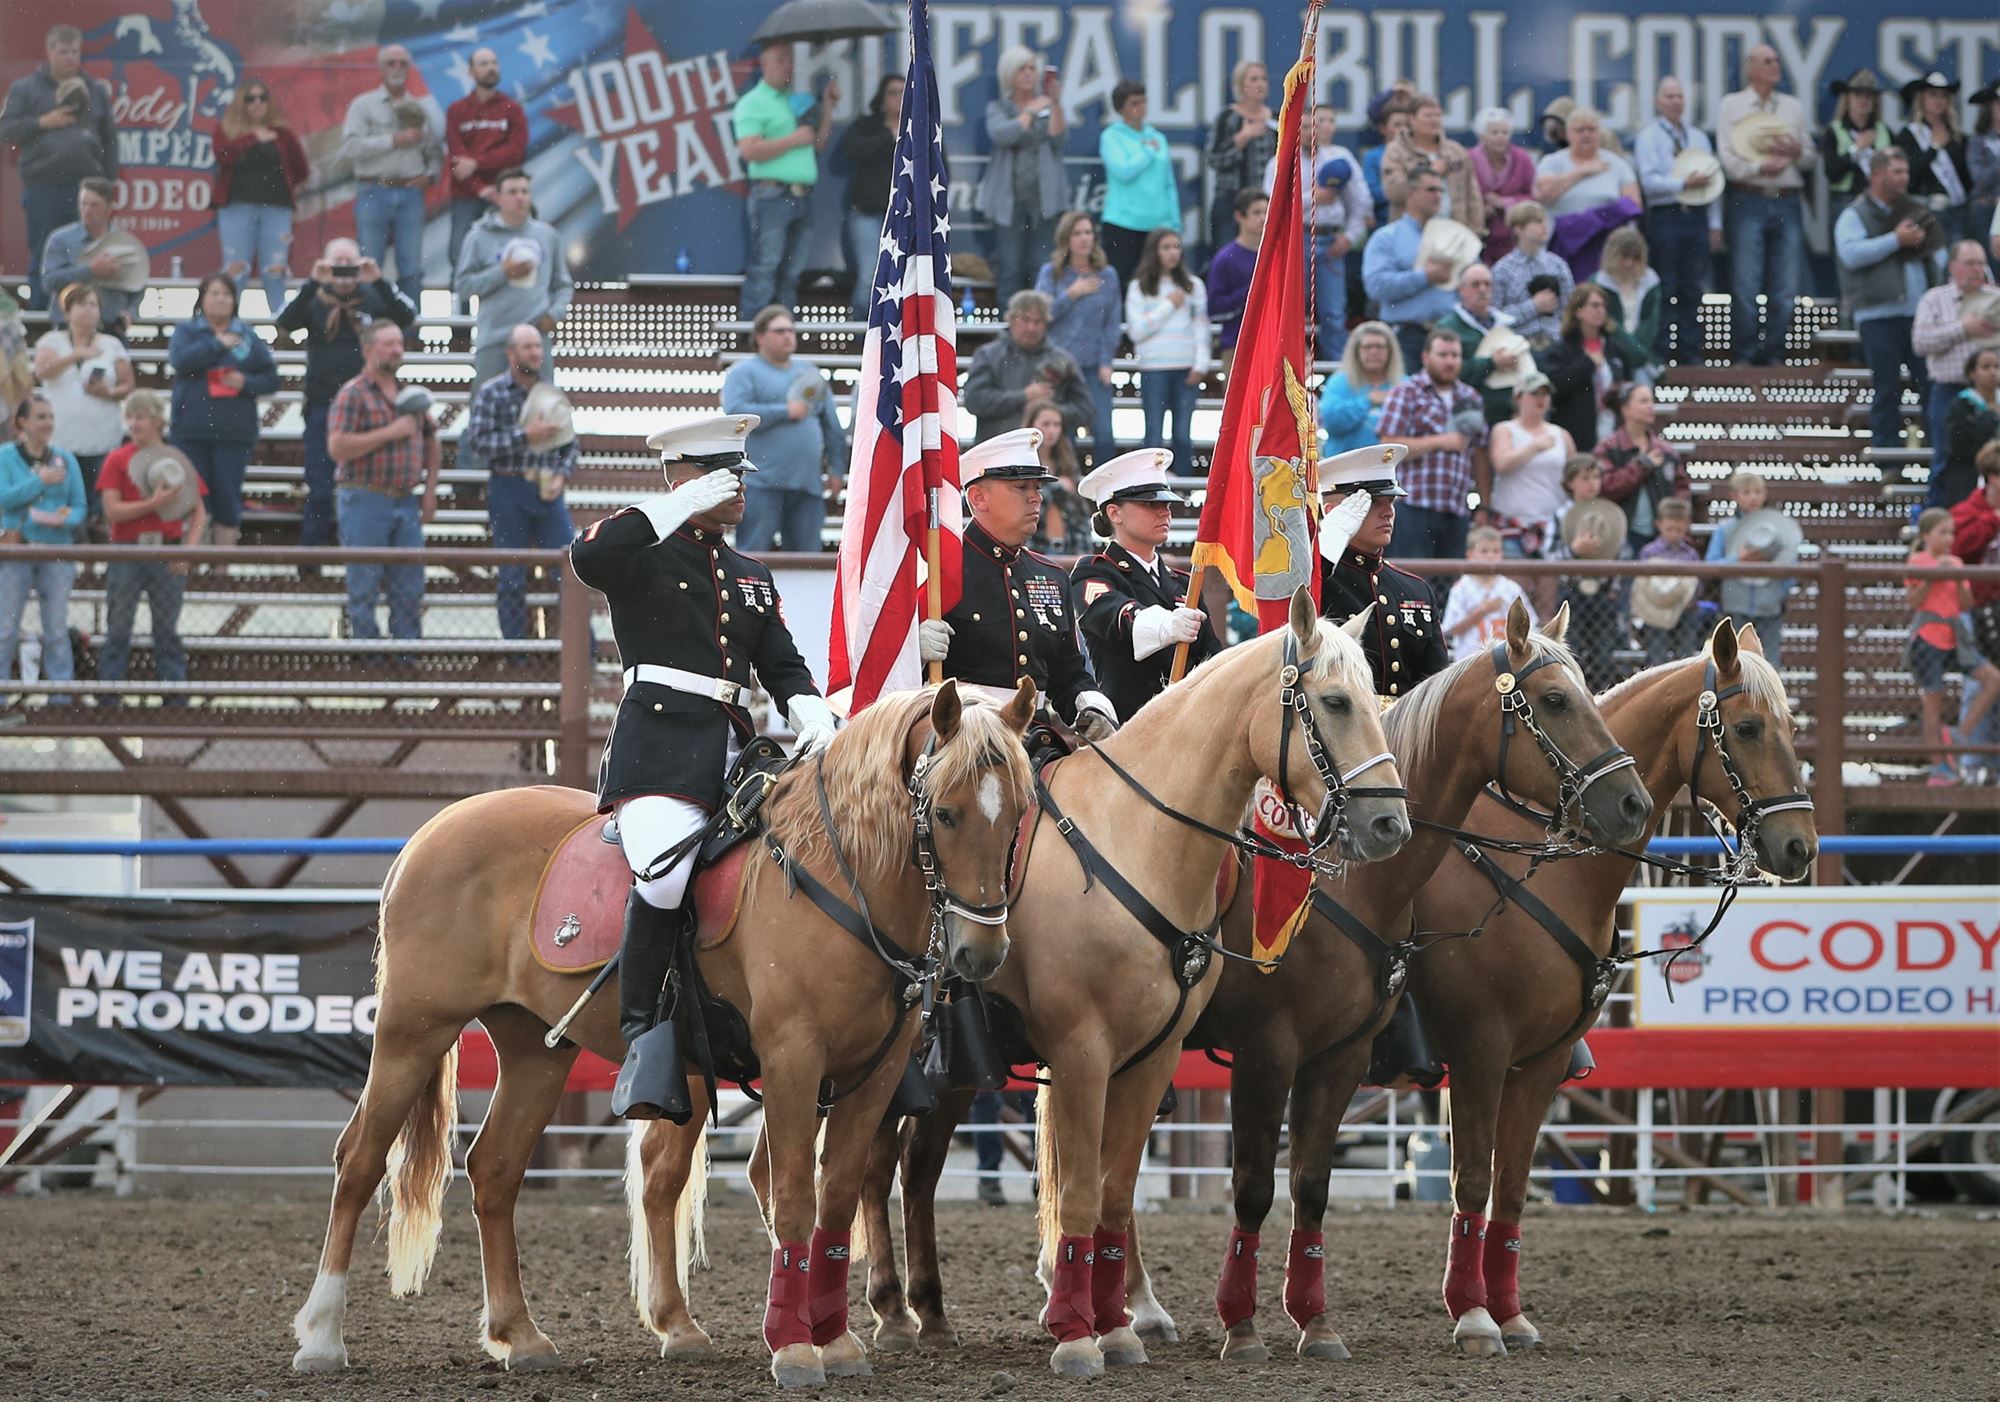 Cody Wyoming Rodeo Tickets Get Tickets for Rodeo in Cody, WY